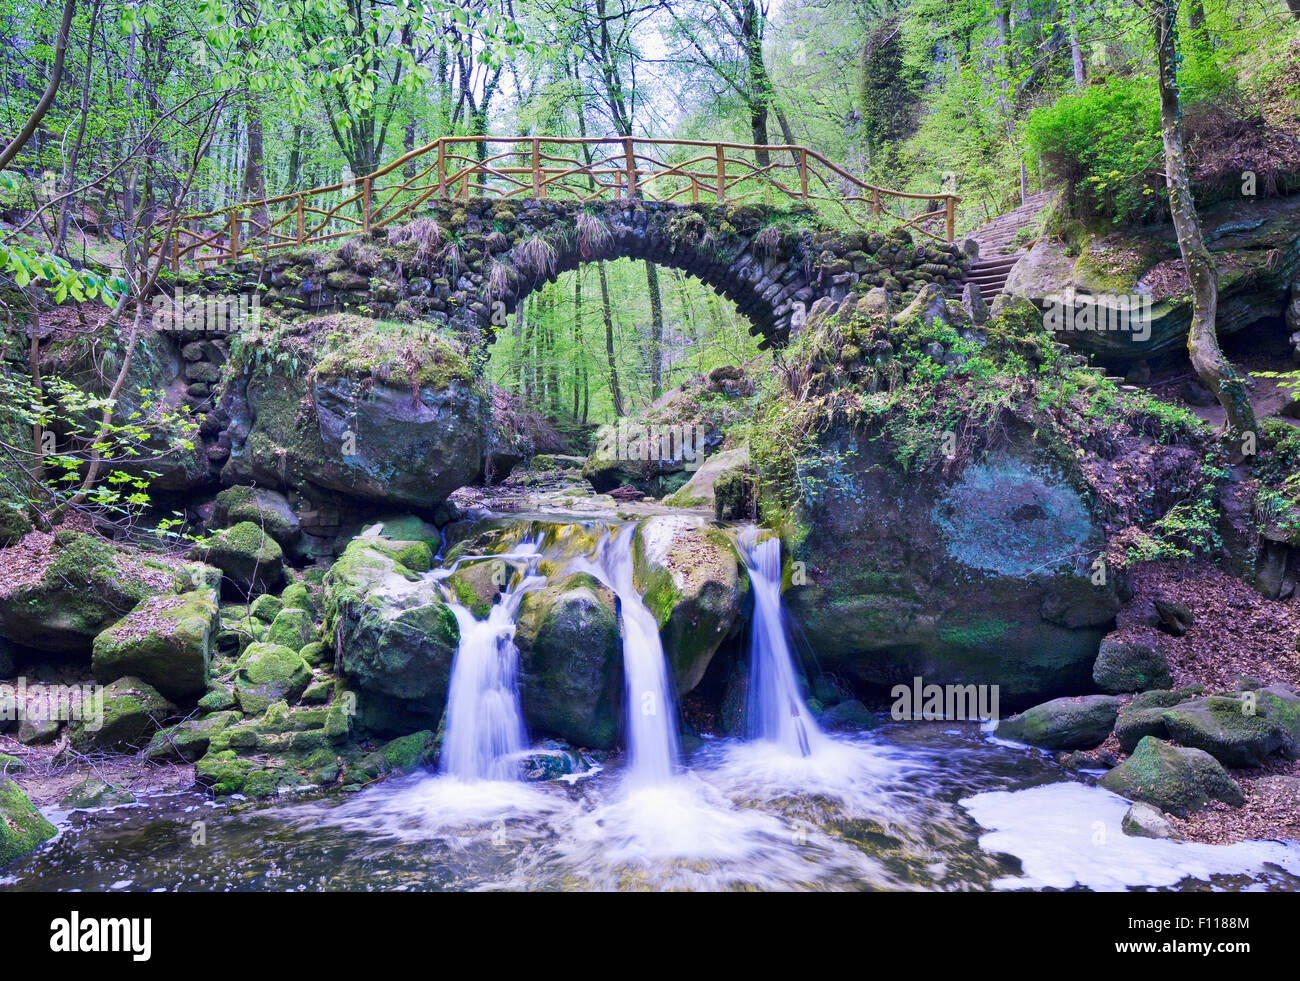 The Schiessentumpel waterfall and bridge in the Mullerthal Region in Luxembourg Stock Photo